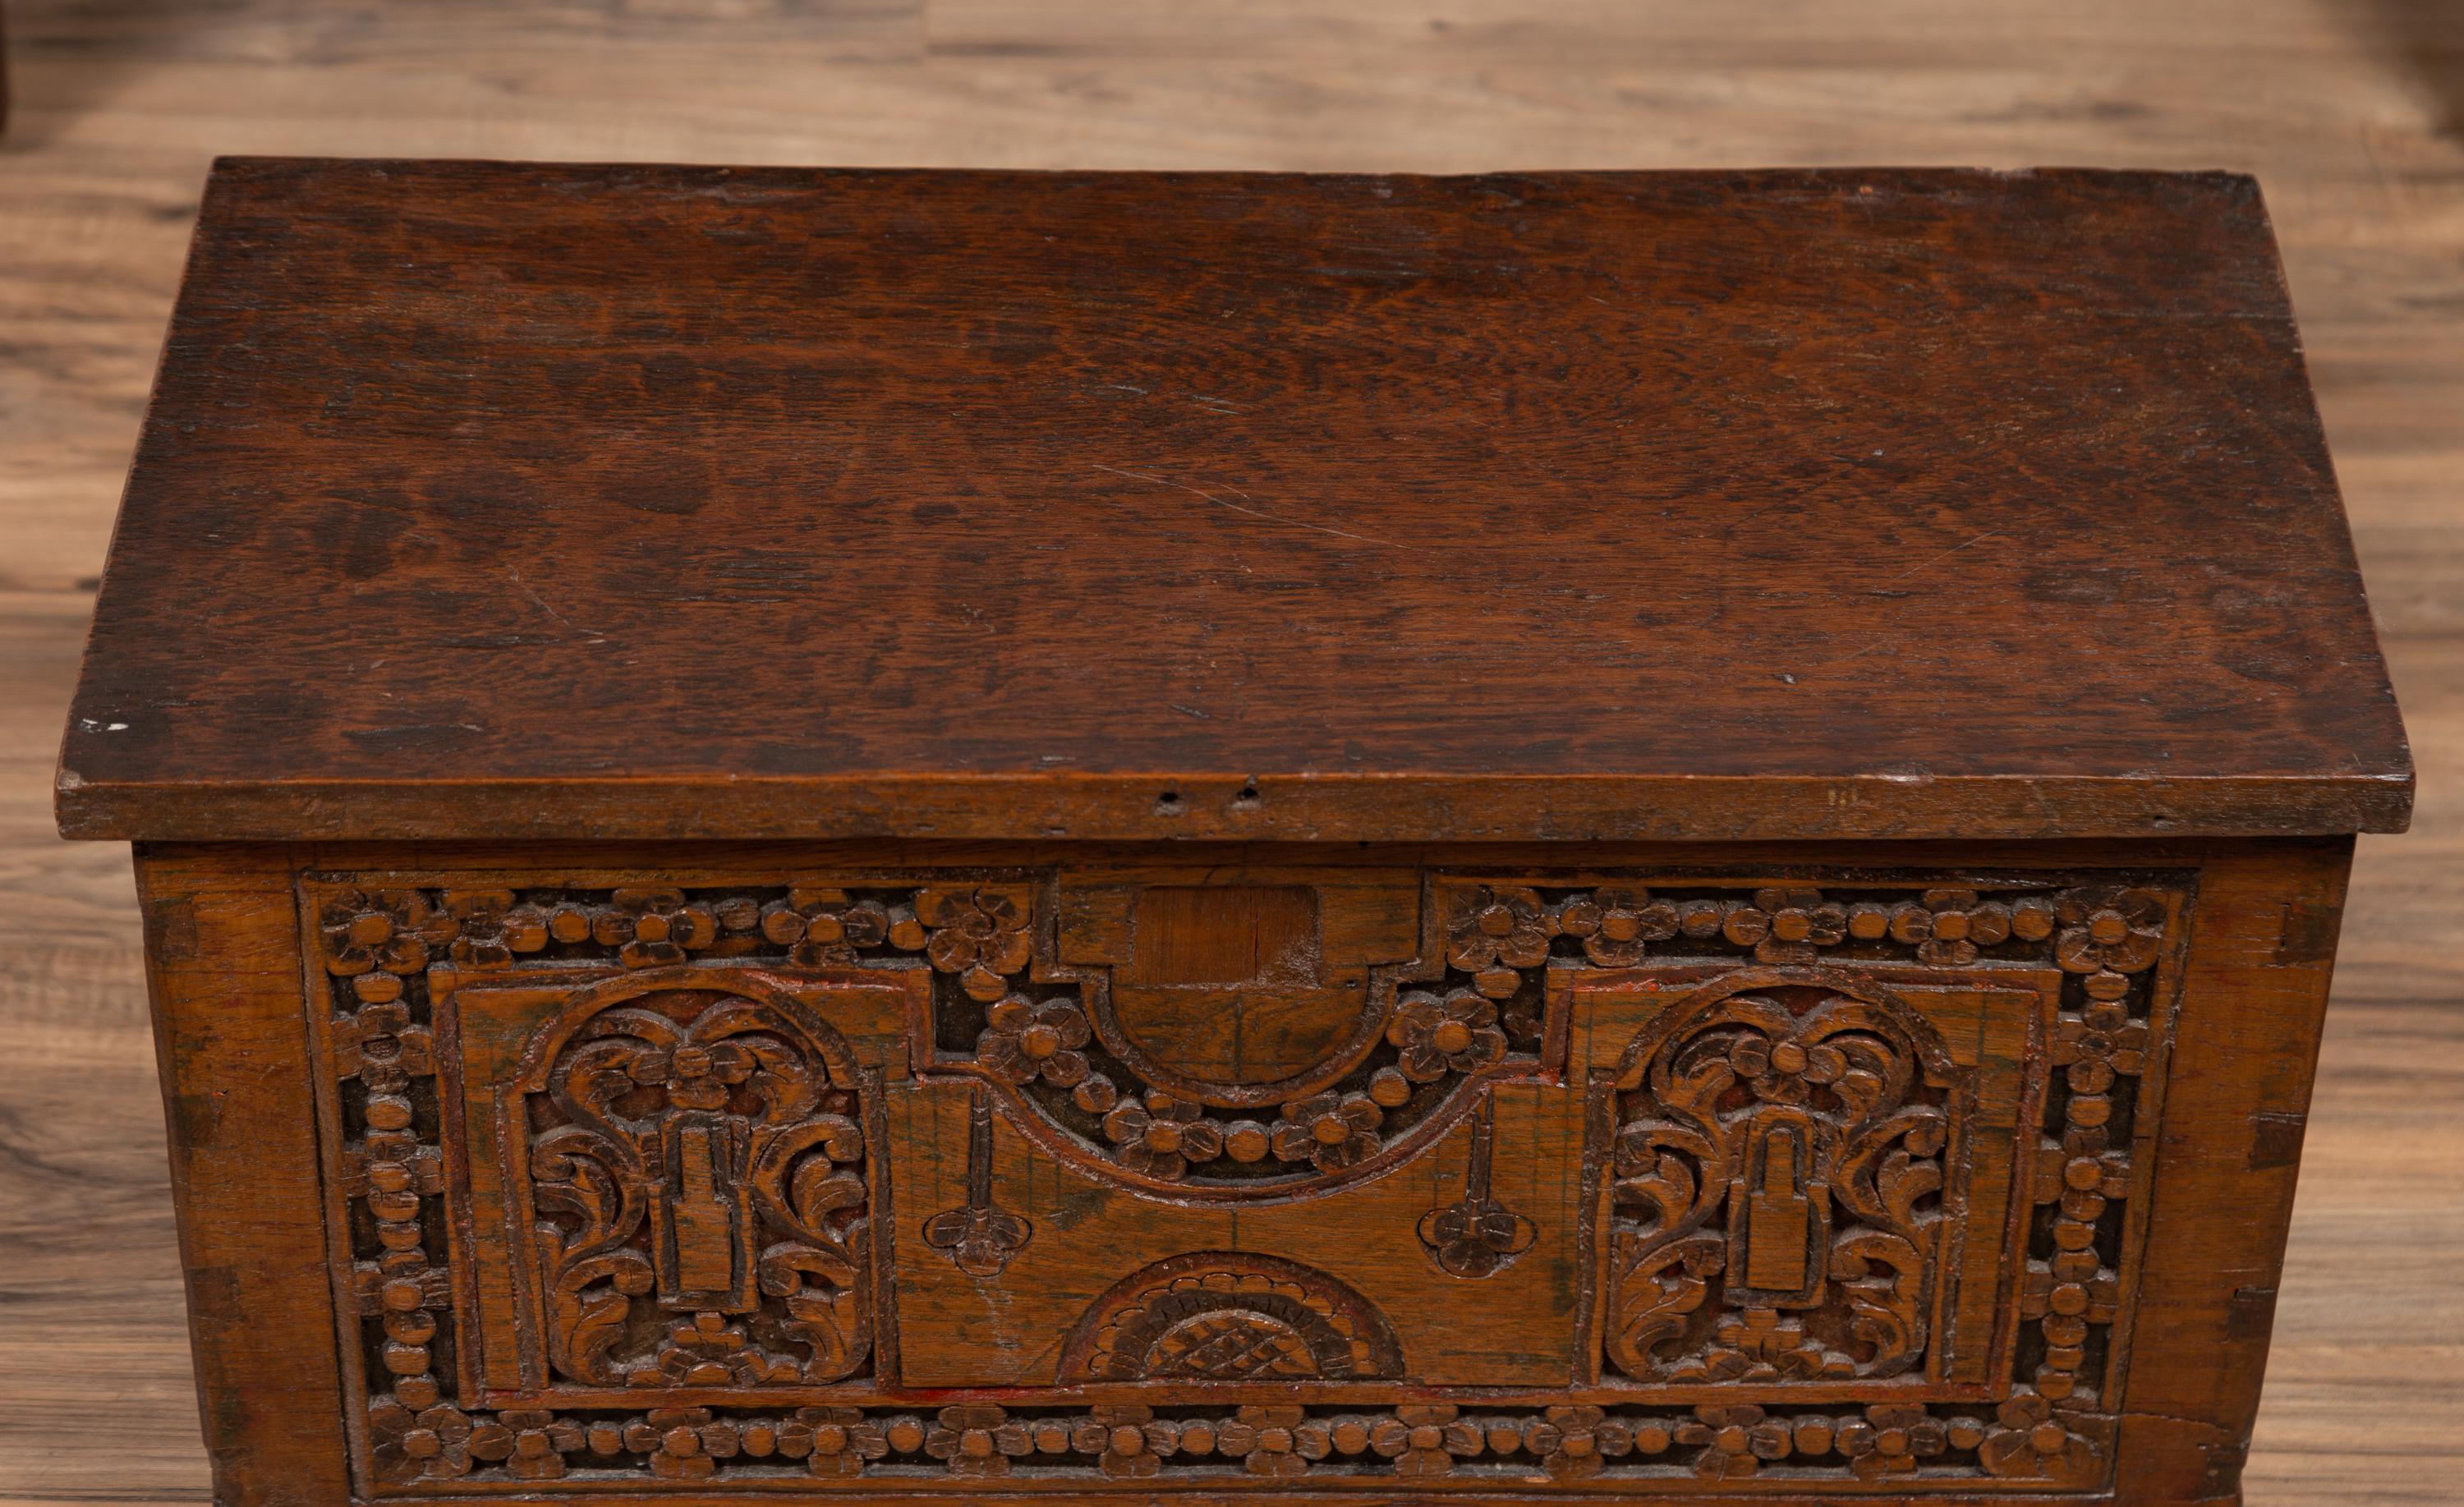 Antique Indonesian Decorative Wooden Box with Carved Flowers and Architecture For Sale 2